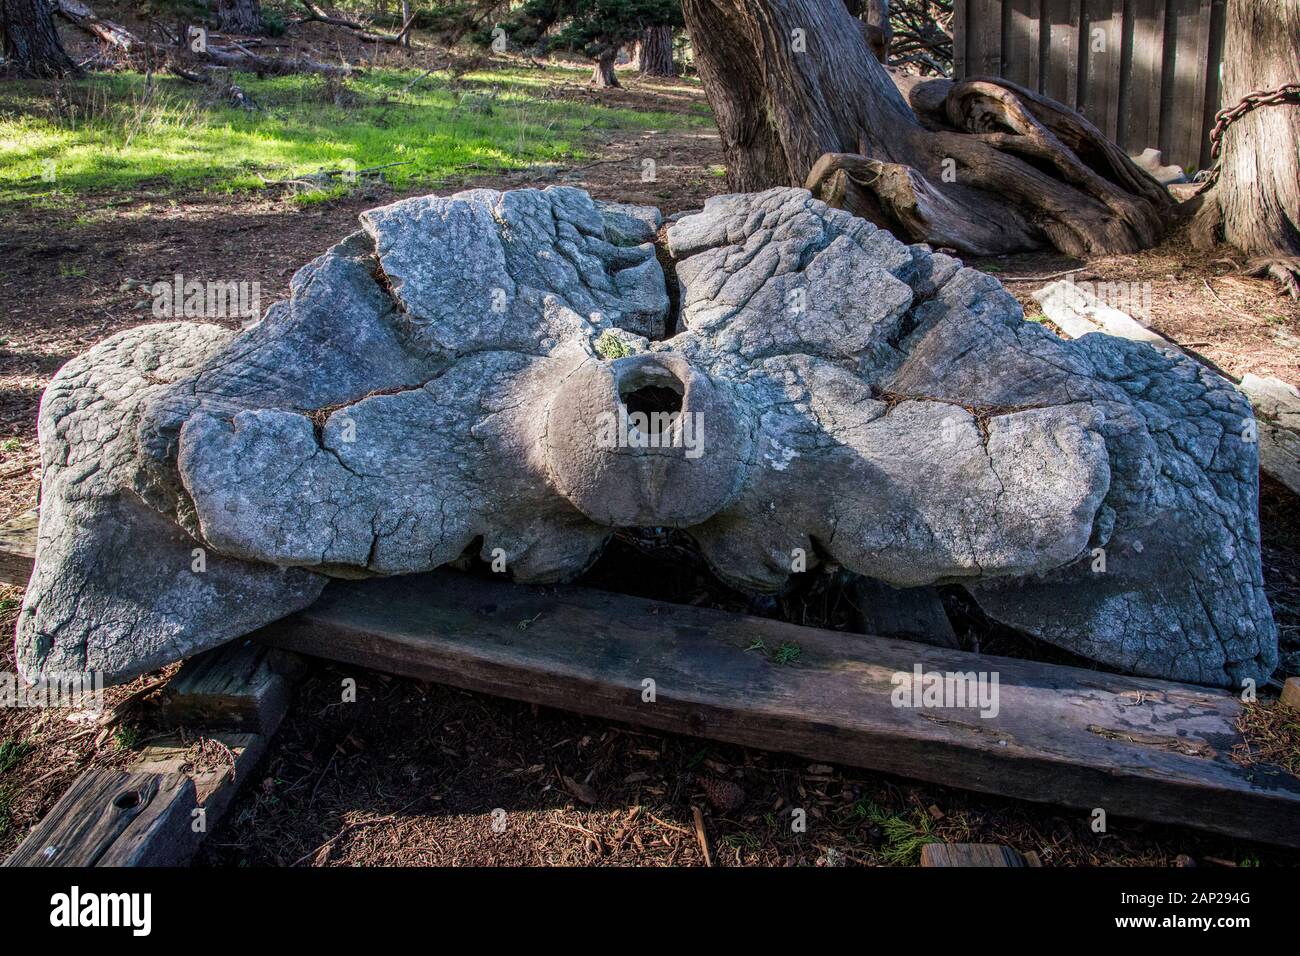 Display of whale bone from historic whaling industry at Point Lobos State Natural Reserve, California Stock Photo